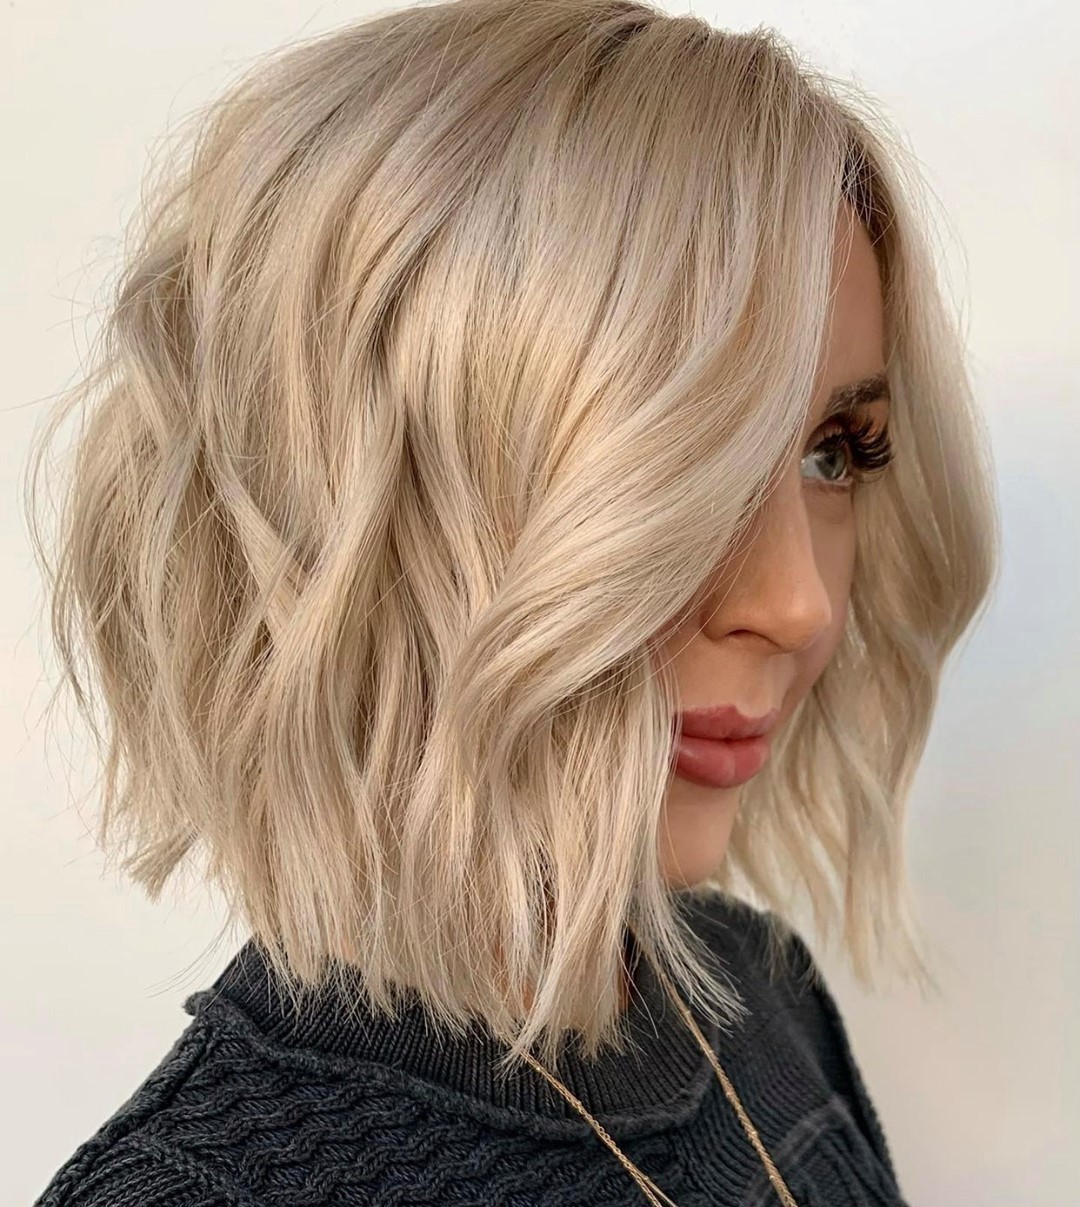 30+ Hottest Short Hairstyles & Short Haircuts For Women For 2021 images 2